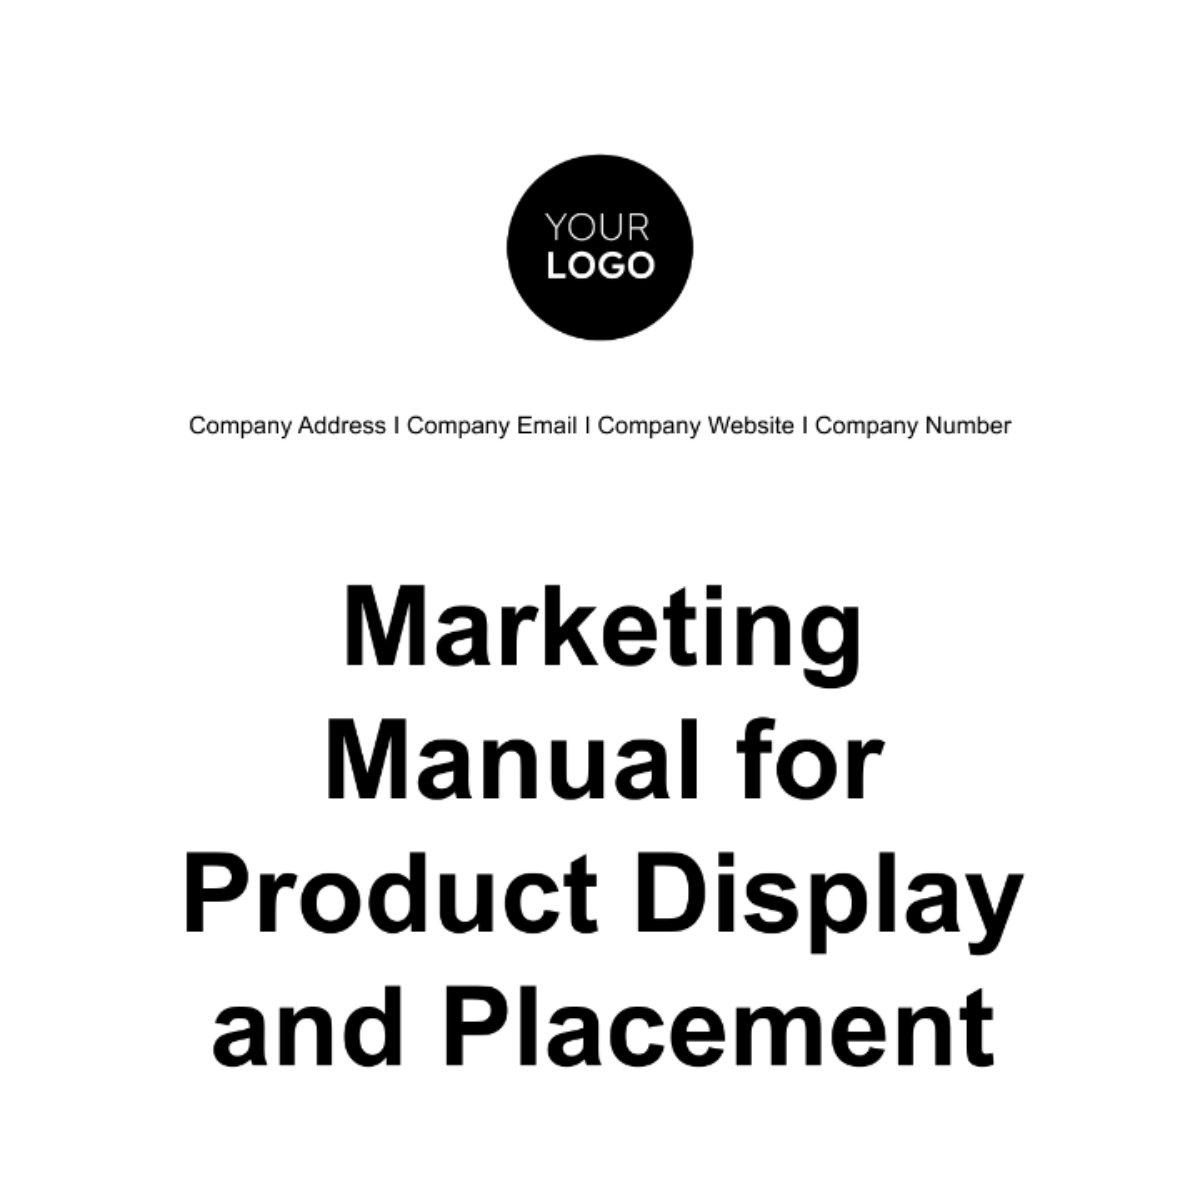 Marketing Manual for Product Display and Placement Template